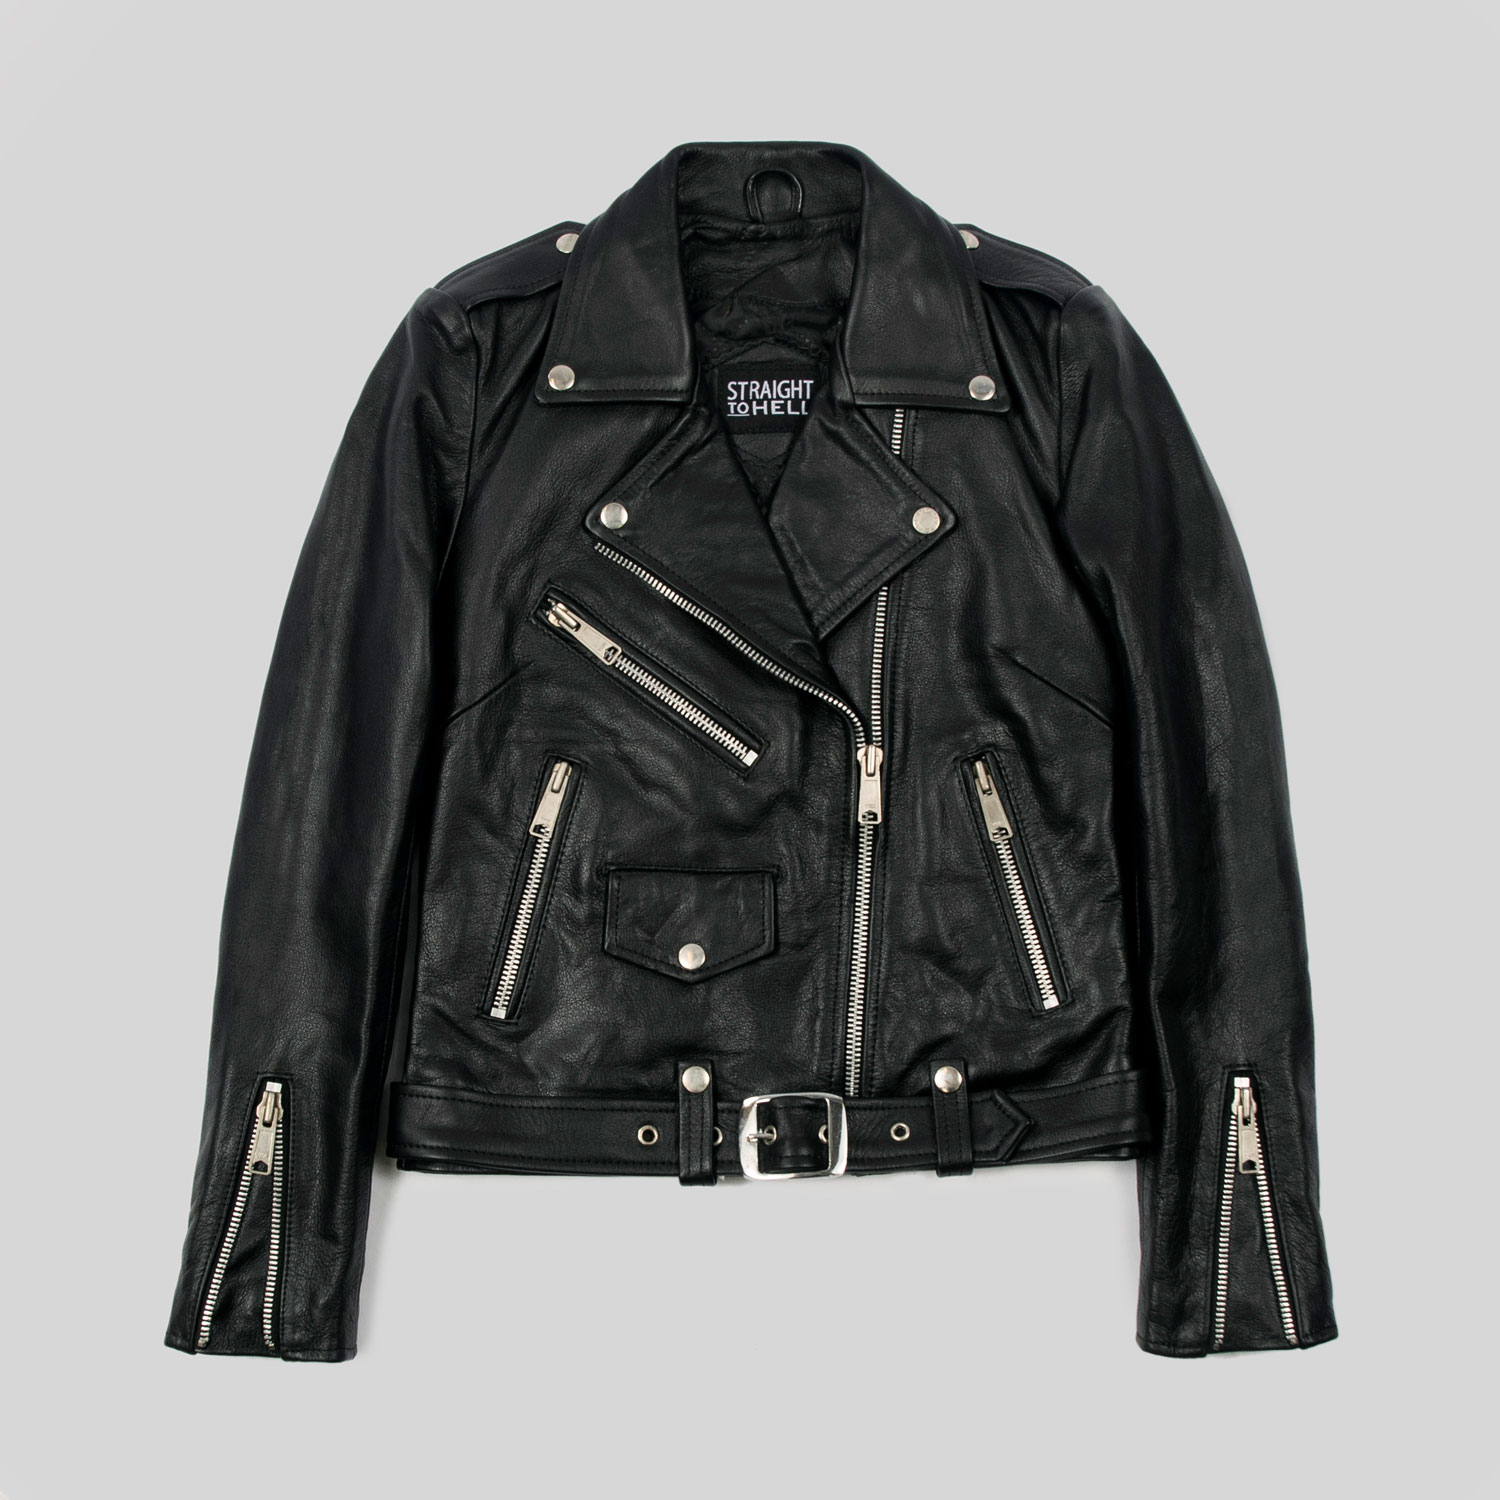 Hell To Straight - - Leather Lining - Black and | Jacket Commando Apparel Black Nickel